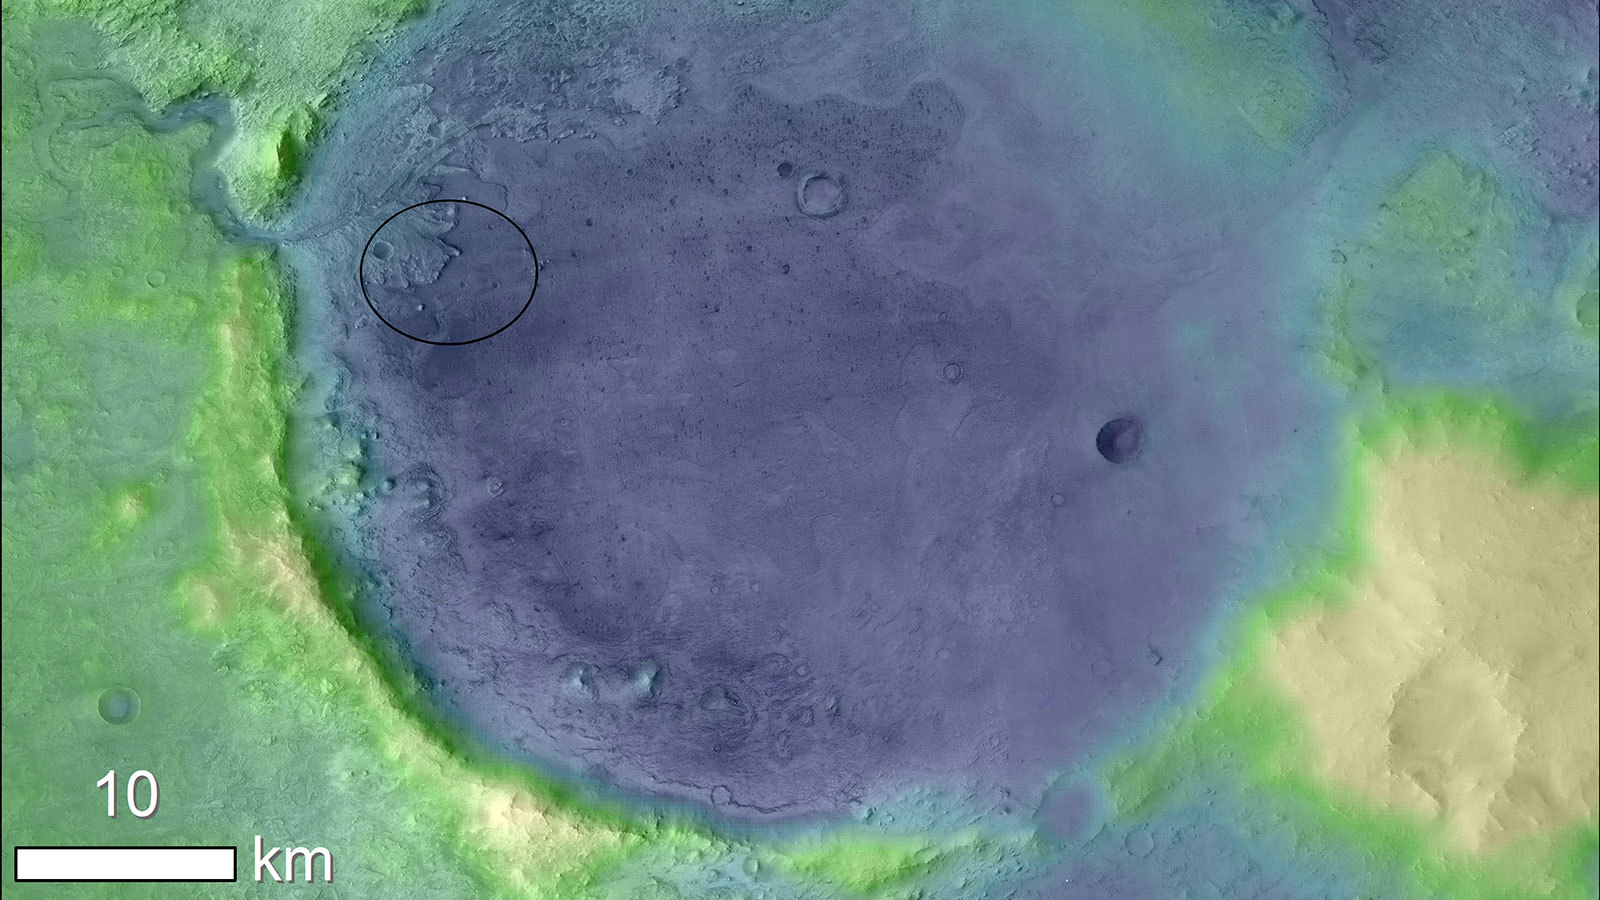 Image showing the Jezero Crater on the surface of Mars.